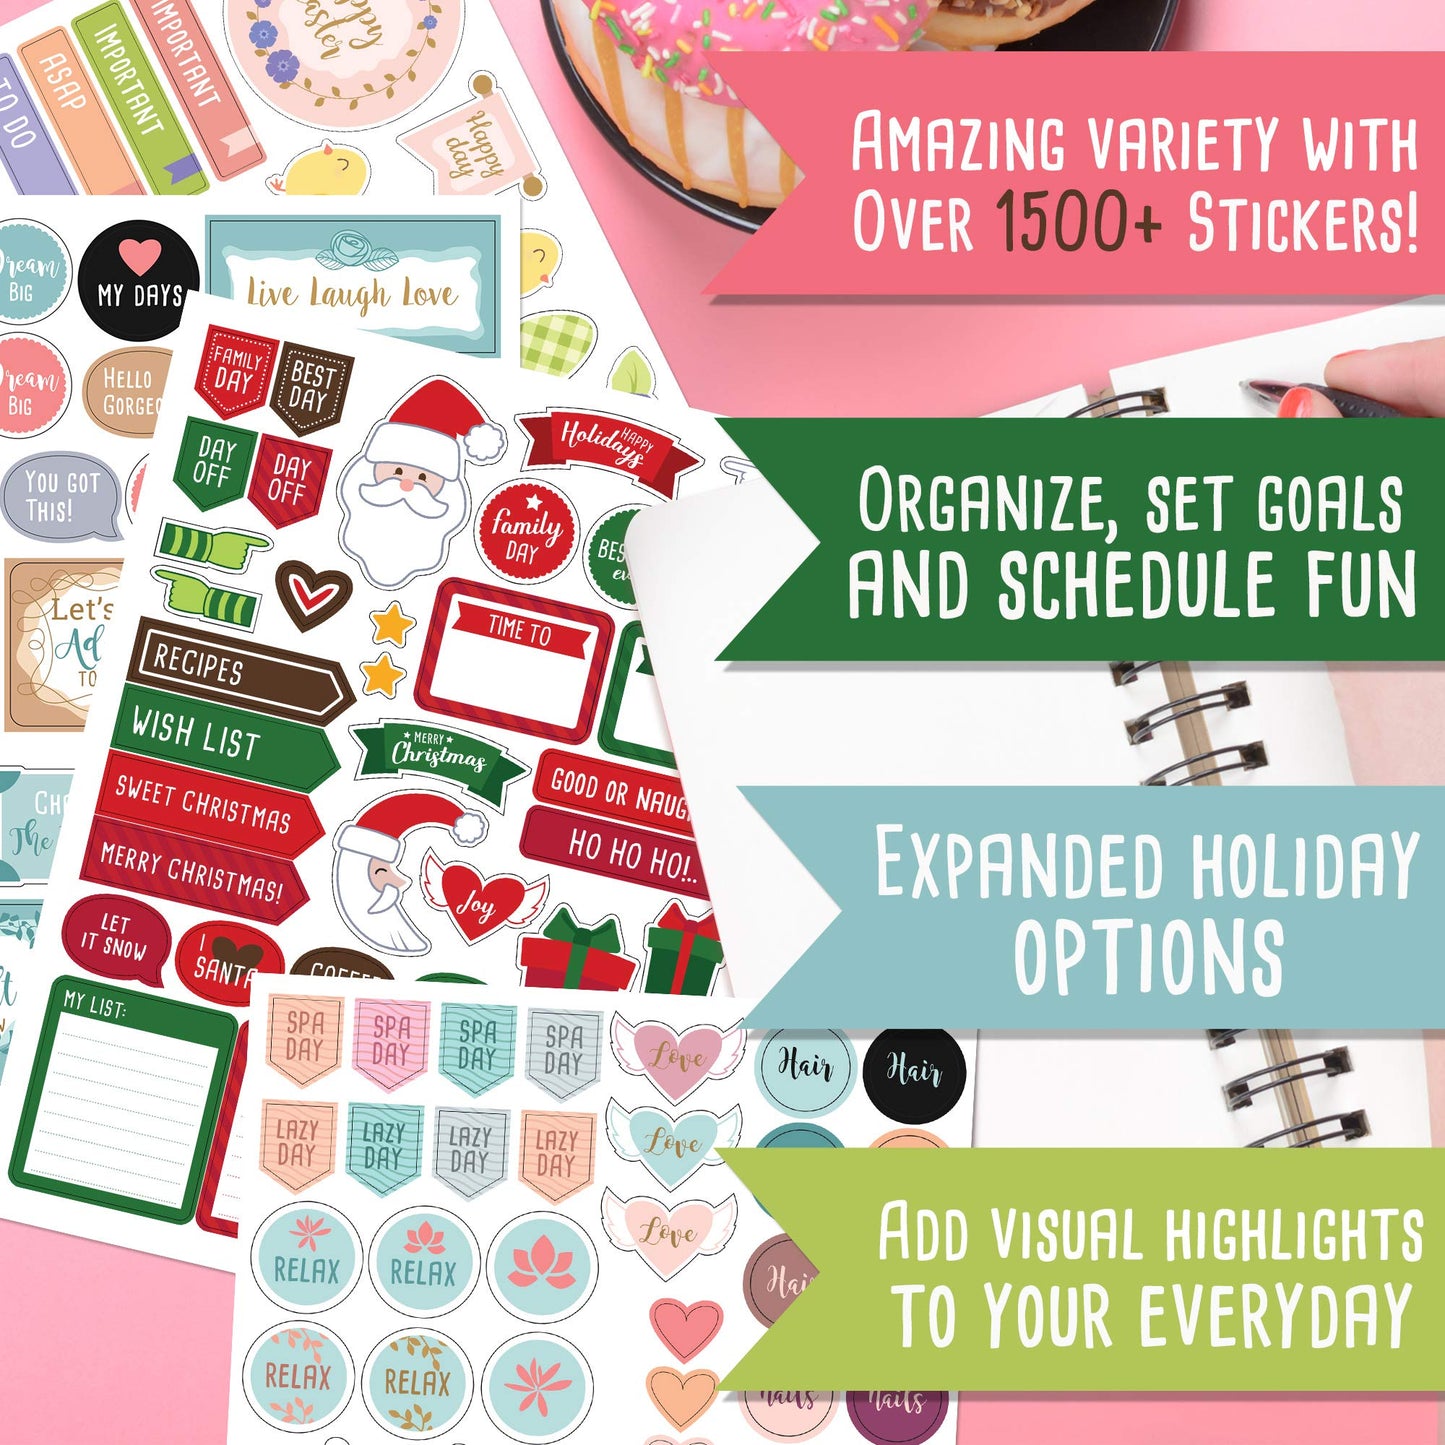 Aesthetic Planner Stickers - 1500+ Stunning Design Accessories Enhance and Simplify Your Planner, Journal, Calendar and Scrapbook